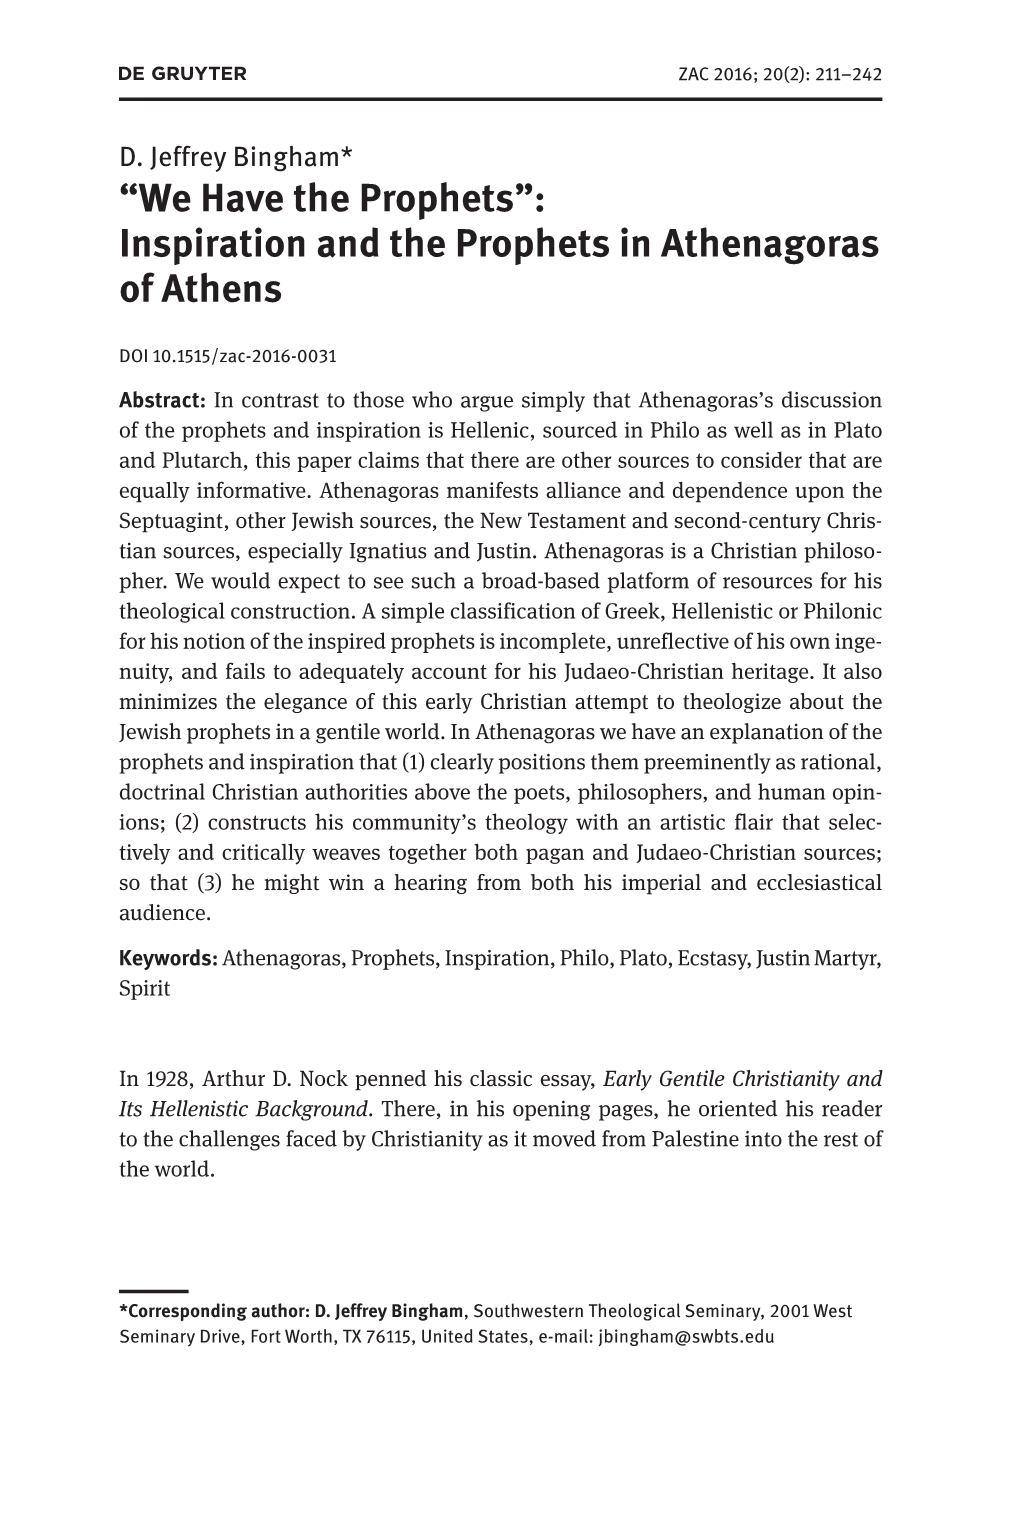 We Have the Prophets”: Inspiration and the Prophets in Athenagoras of Athens